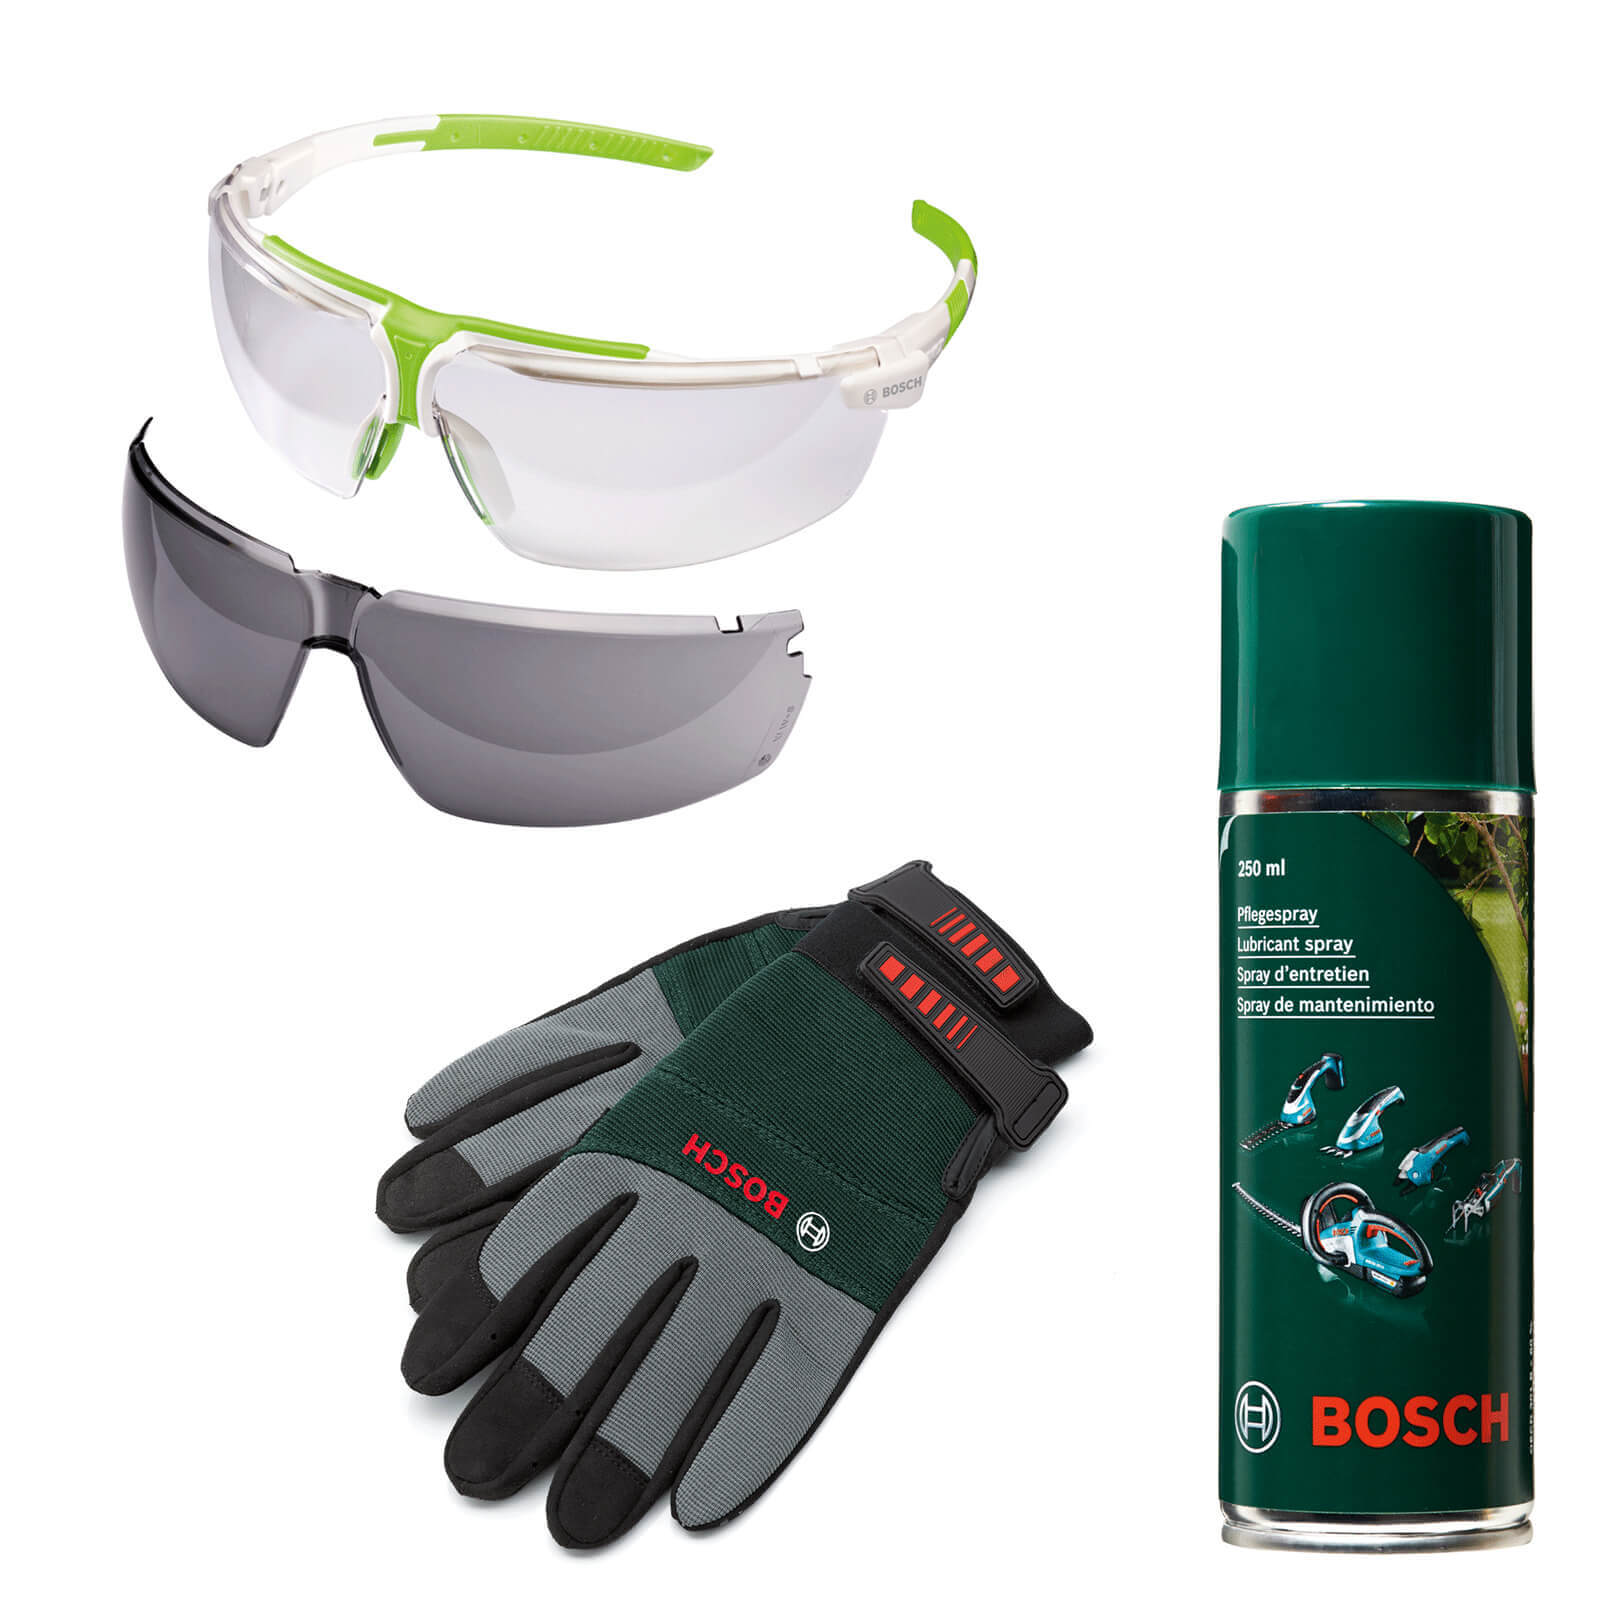 Image of Bosch Outdoor Power Tool Safety and Maintenance Kit